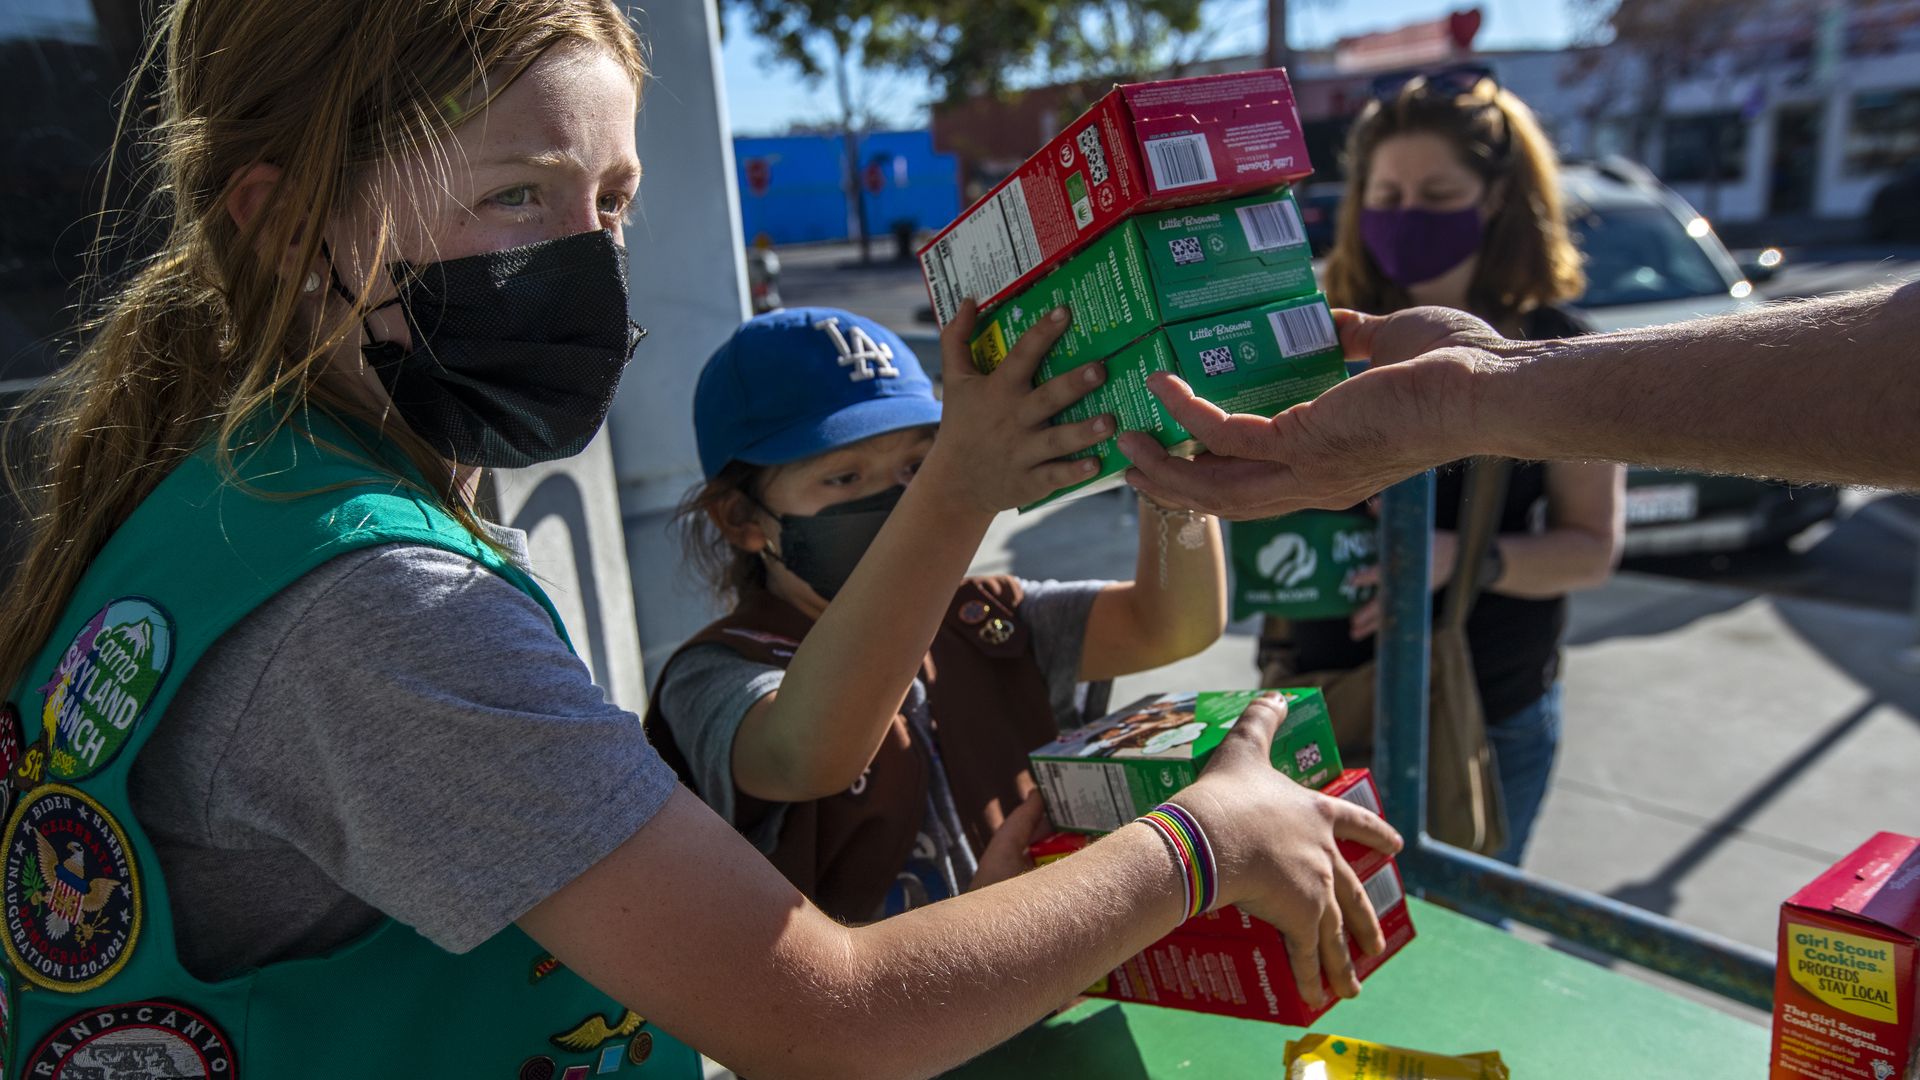 Girl Scouts with cookie boxes